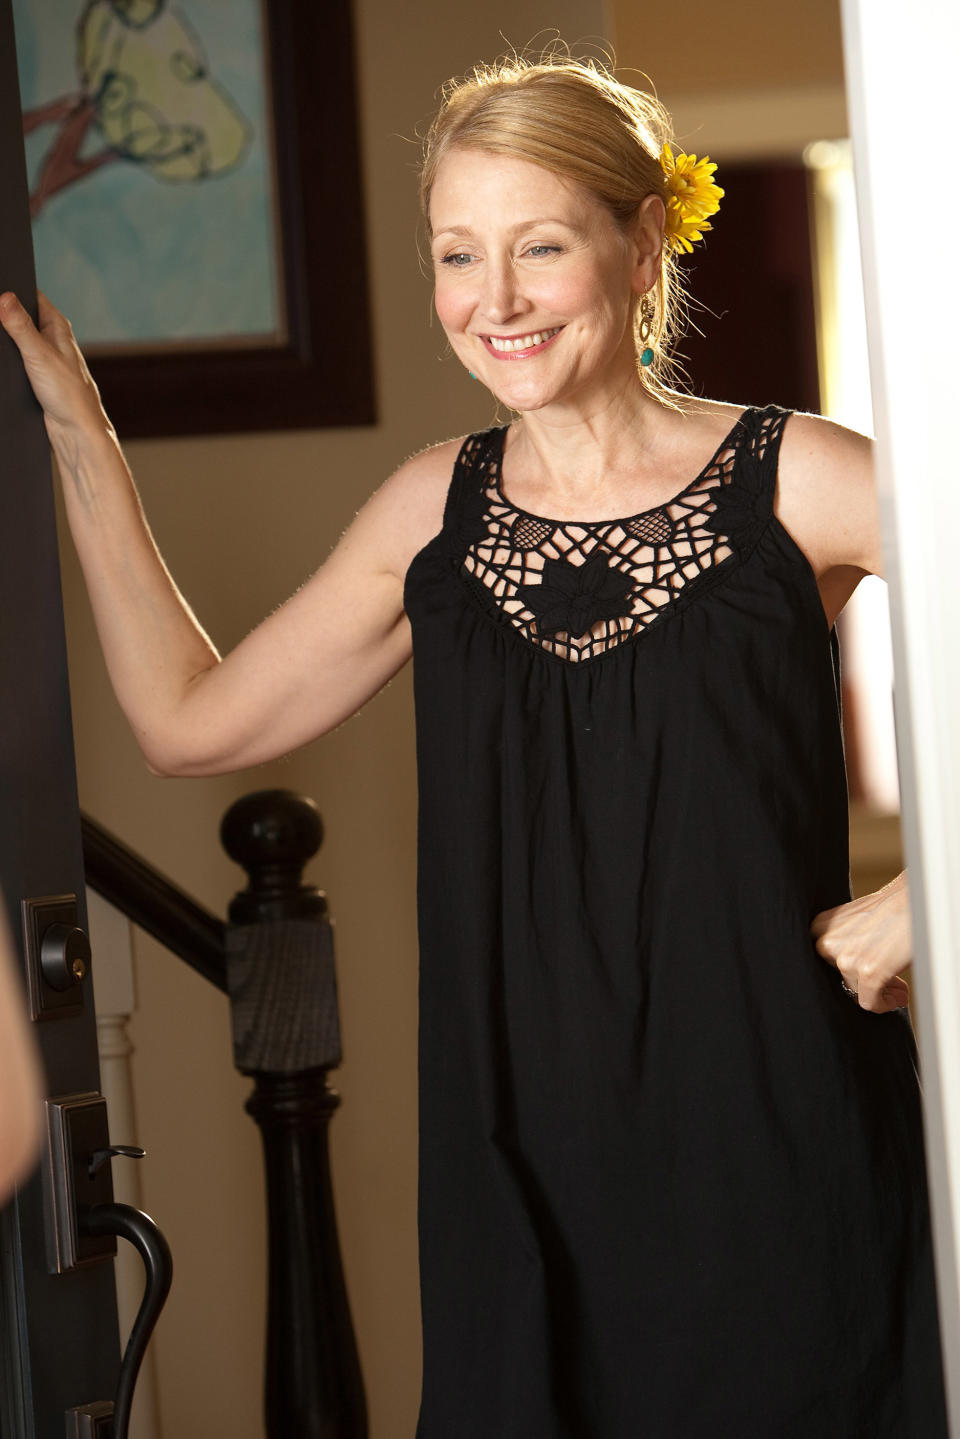 Patricia Clarkson in a black sleeveless dress with lace detail, smiling with a flower in her hair, indoors